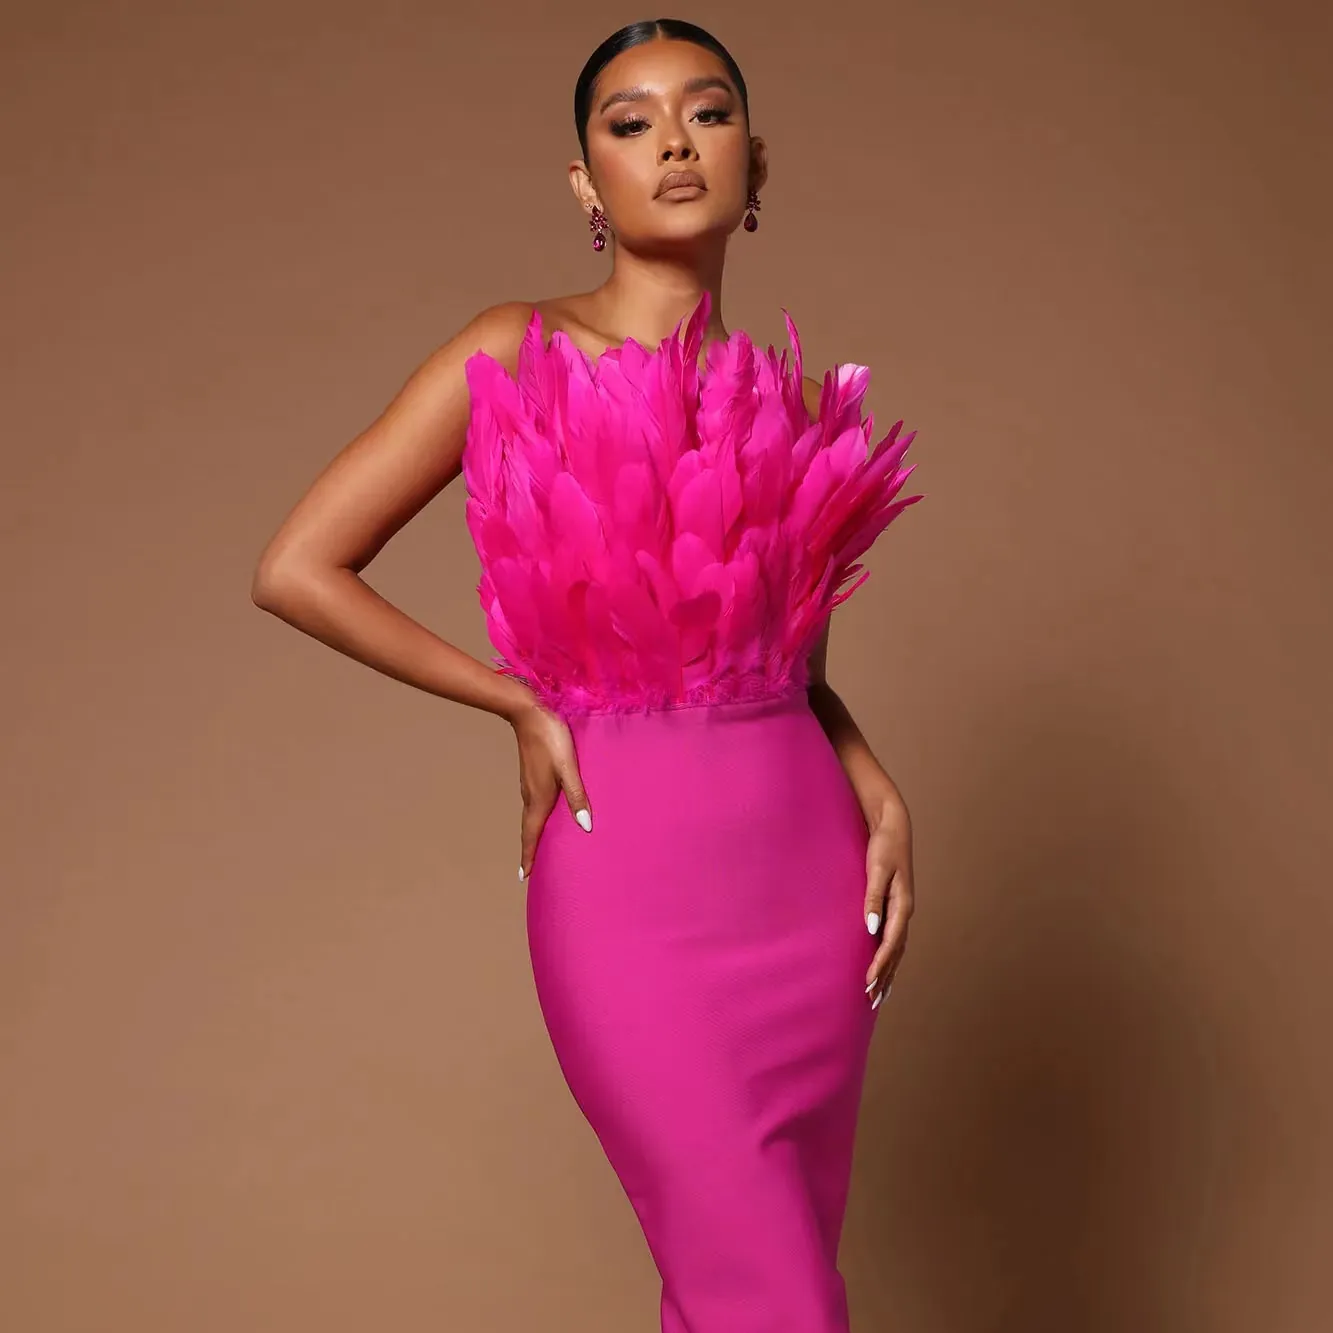 SB2212 Elegant Evening Bandage Dress With Feathers Midi Hot Multiple Color Sleeveless Strapless Bodycon Dresses For Lady